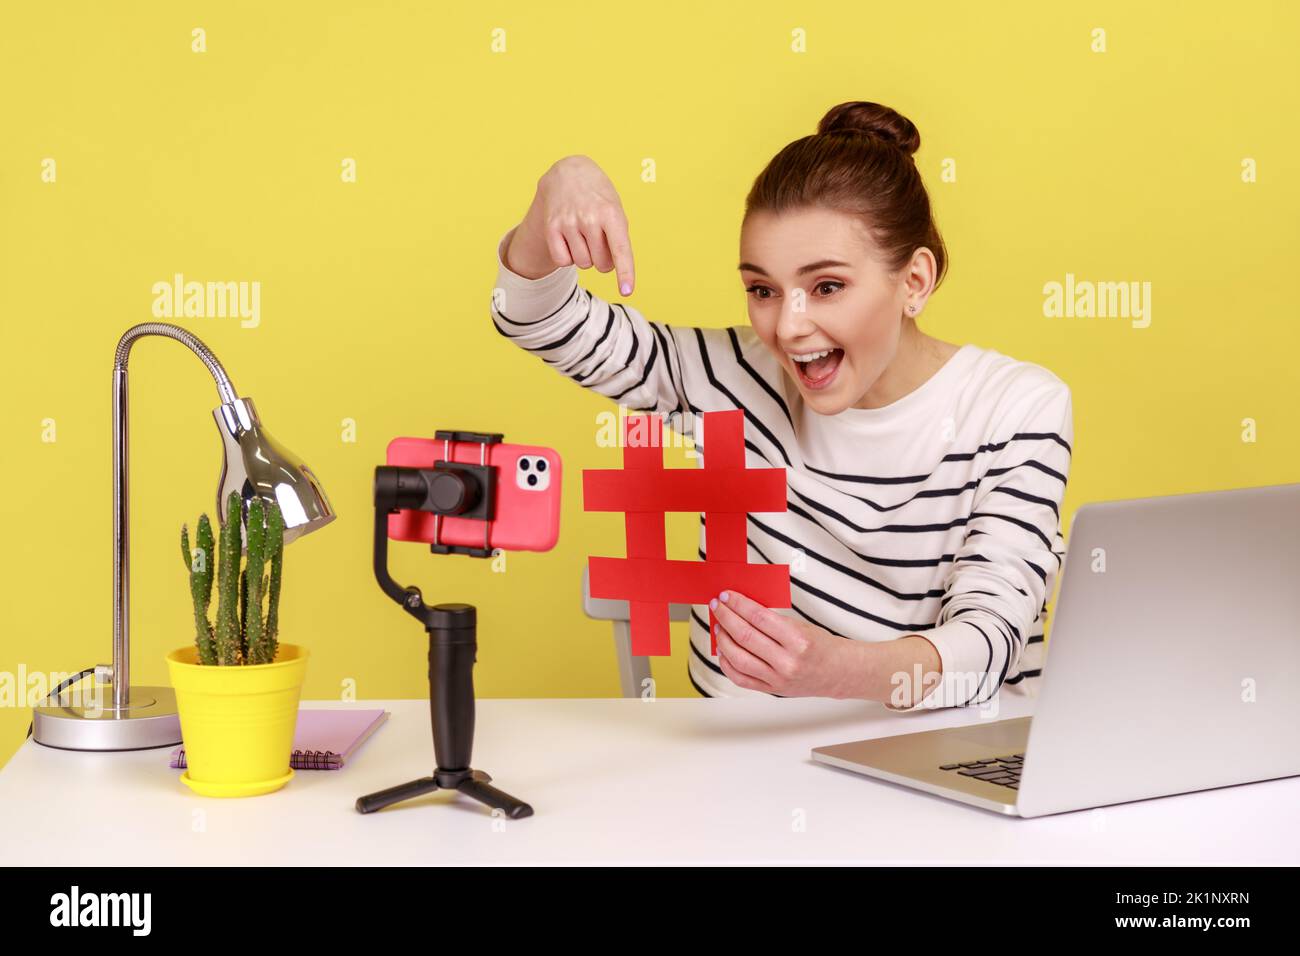 Smiling excited woman blogger showing big red hashtag symbol at smartphone camera, sharing viral content, tagged message. Indoor studio studio shot isolated on yellow background. Stock Photo